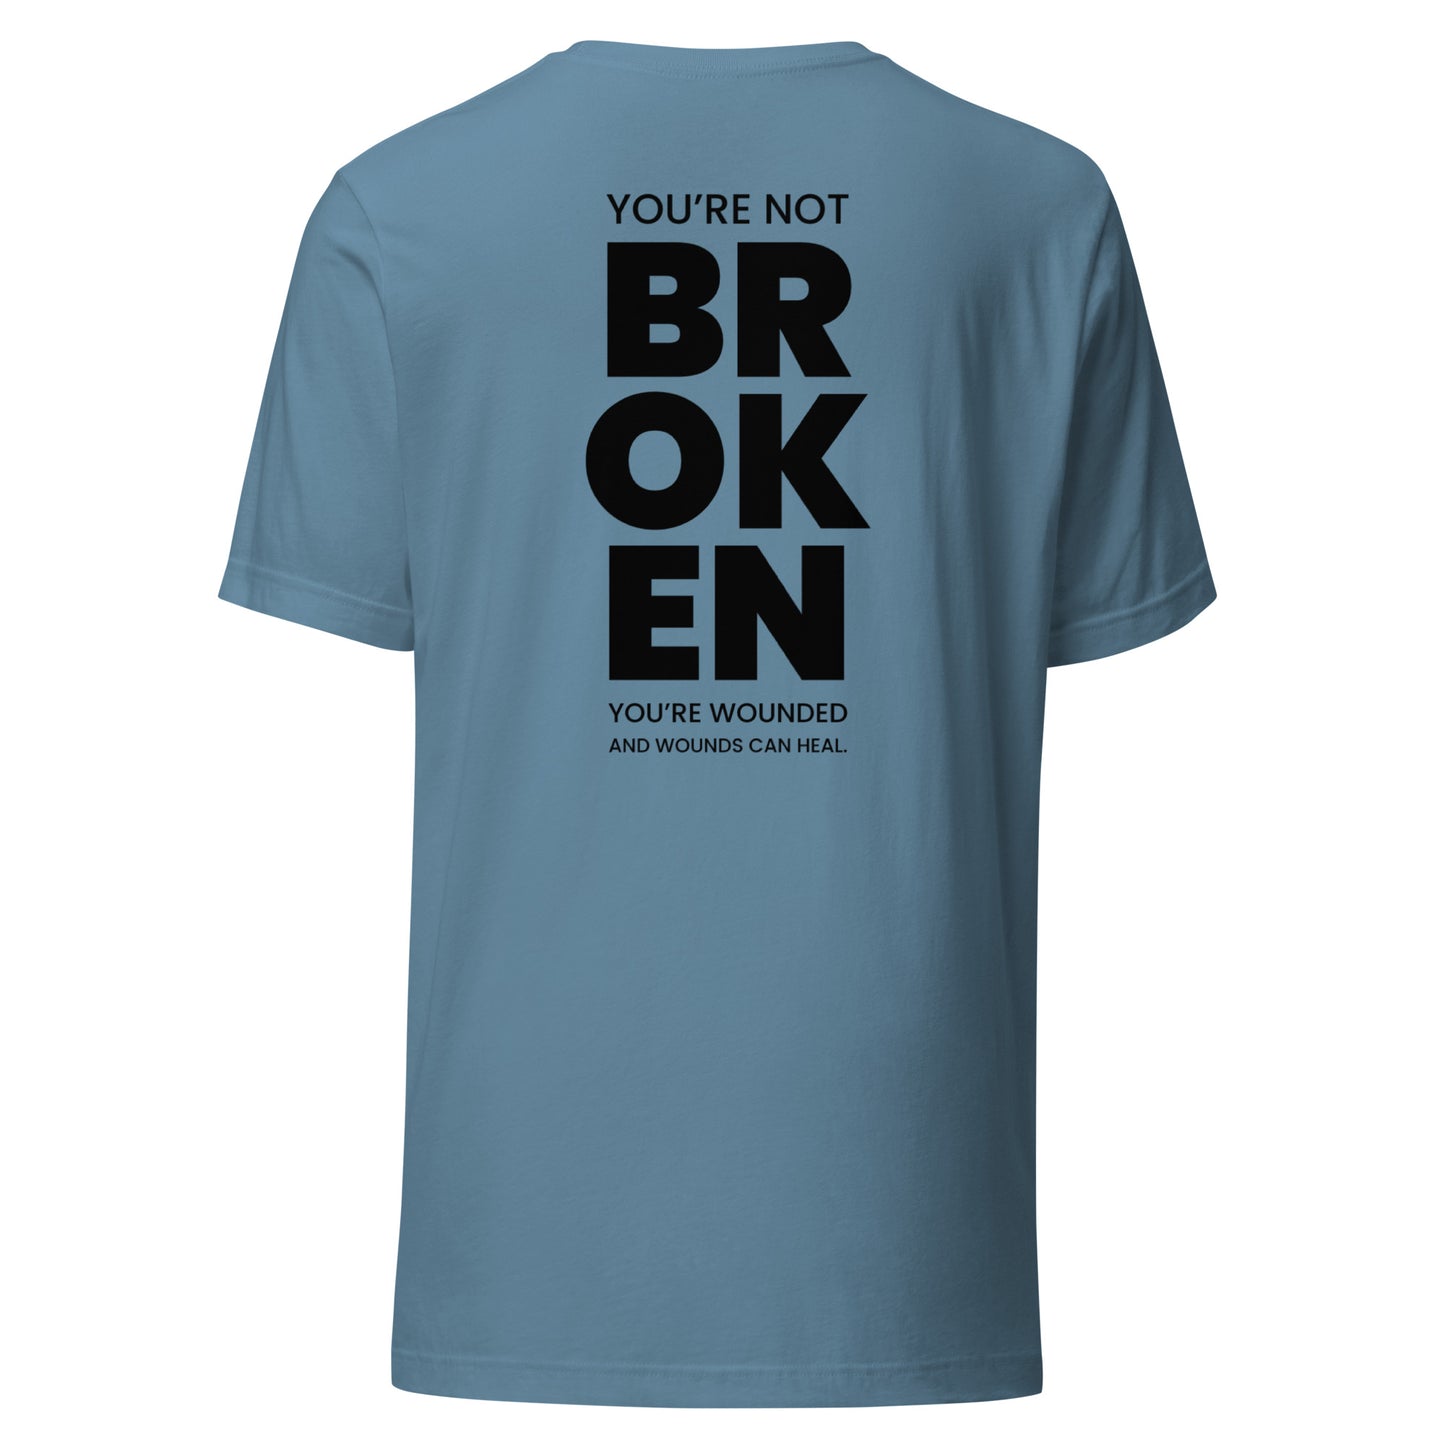 SESSION 1: You're Not Broken T-Shirt